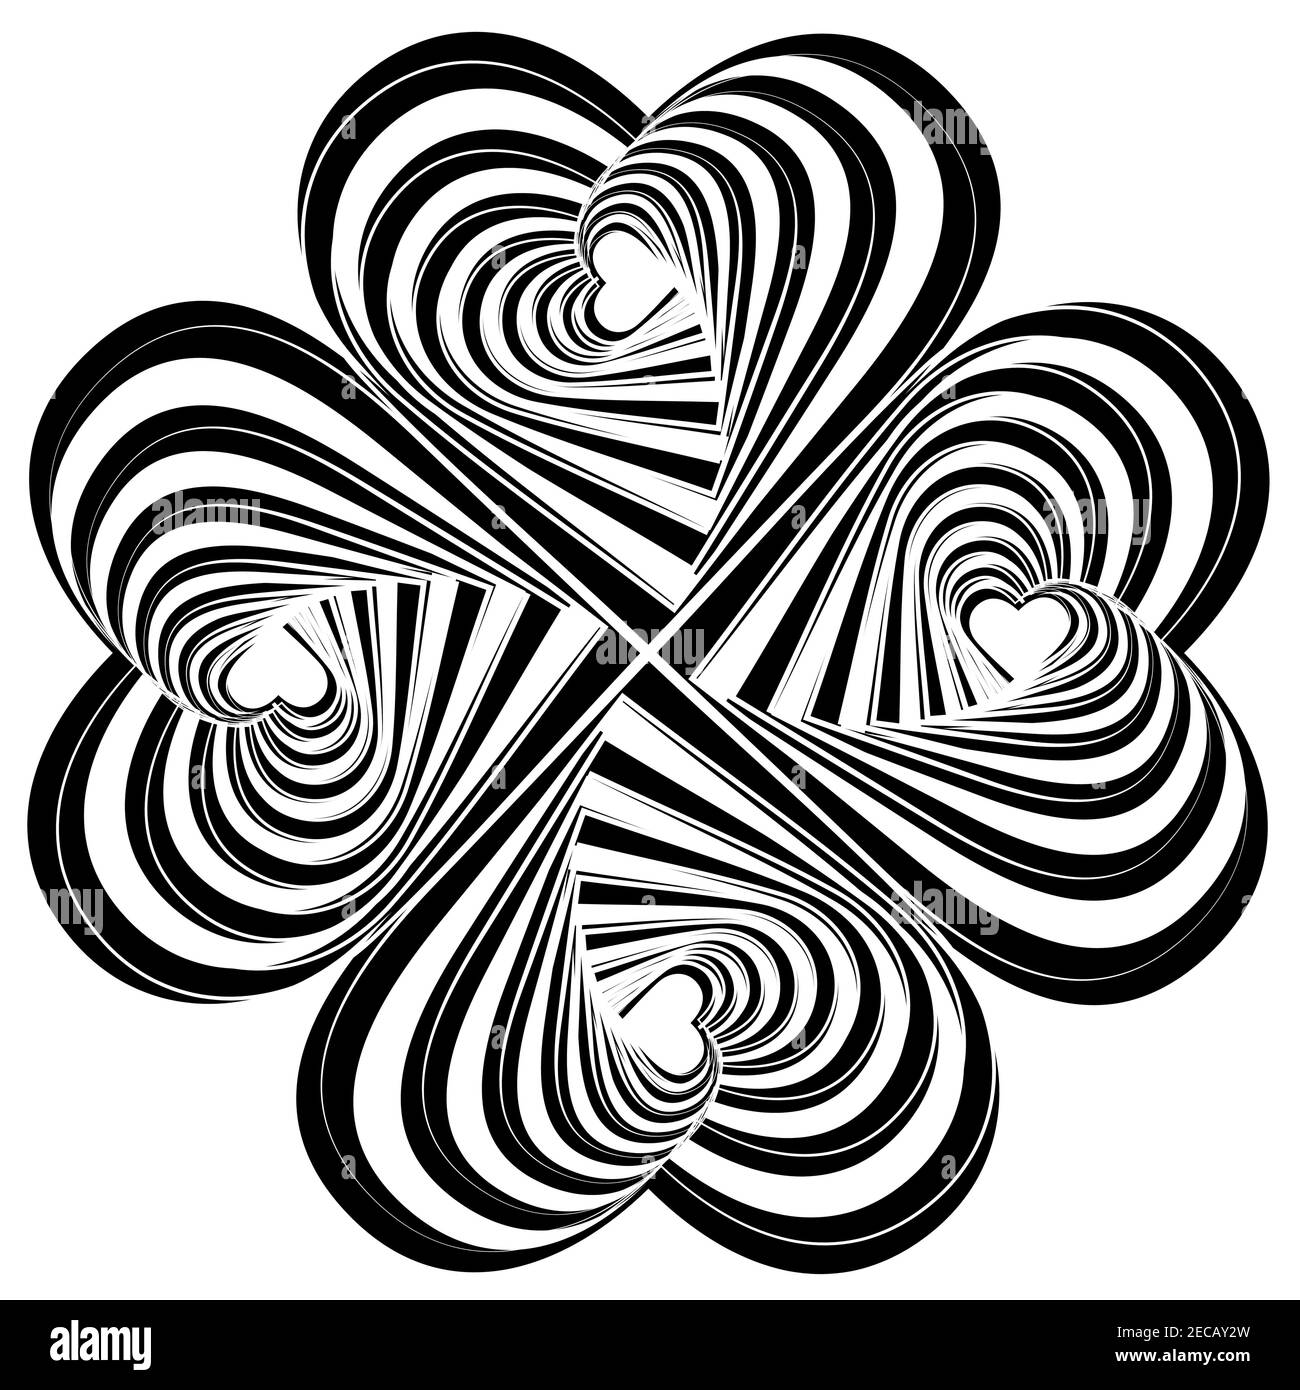 Striped hearts complicated swirl rotation illusion background. Abstract striped distortion twisted backdrop. Vector-art layered illustration. Stock Vector